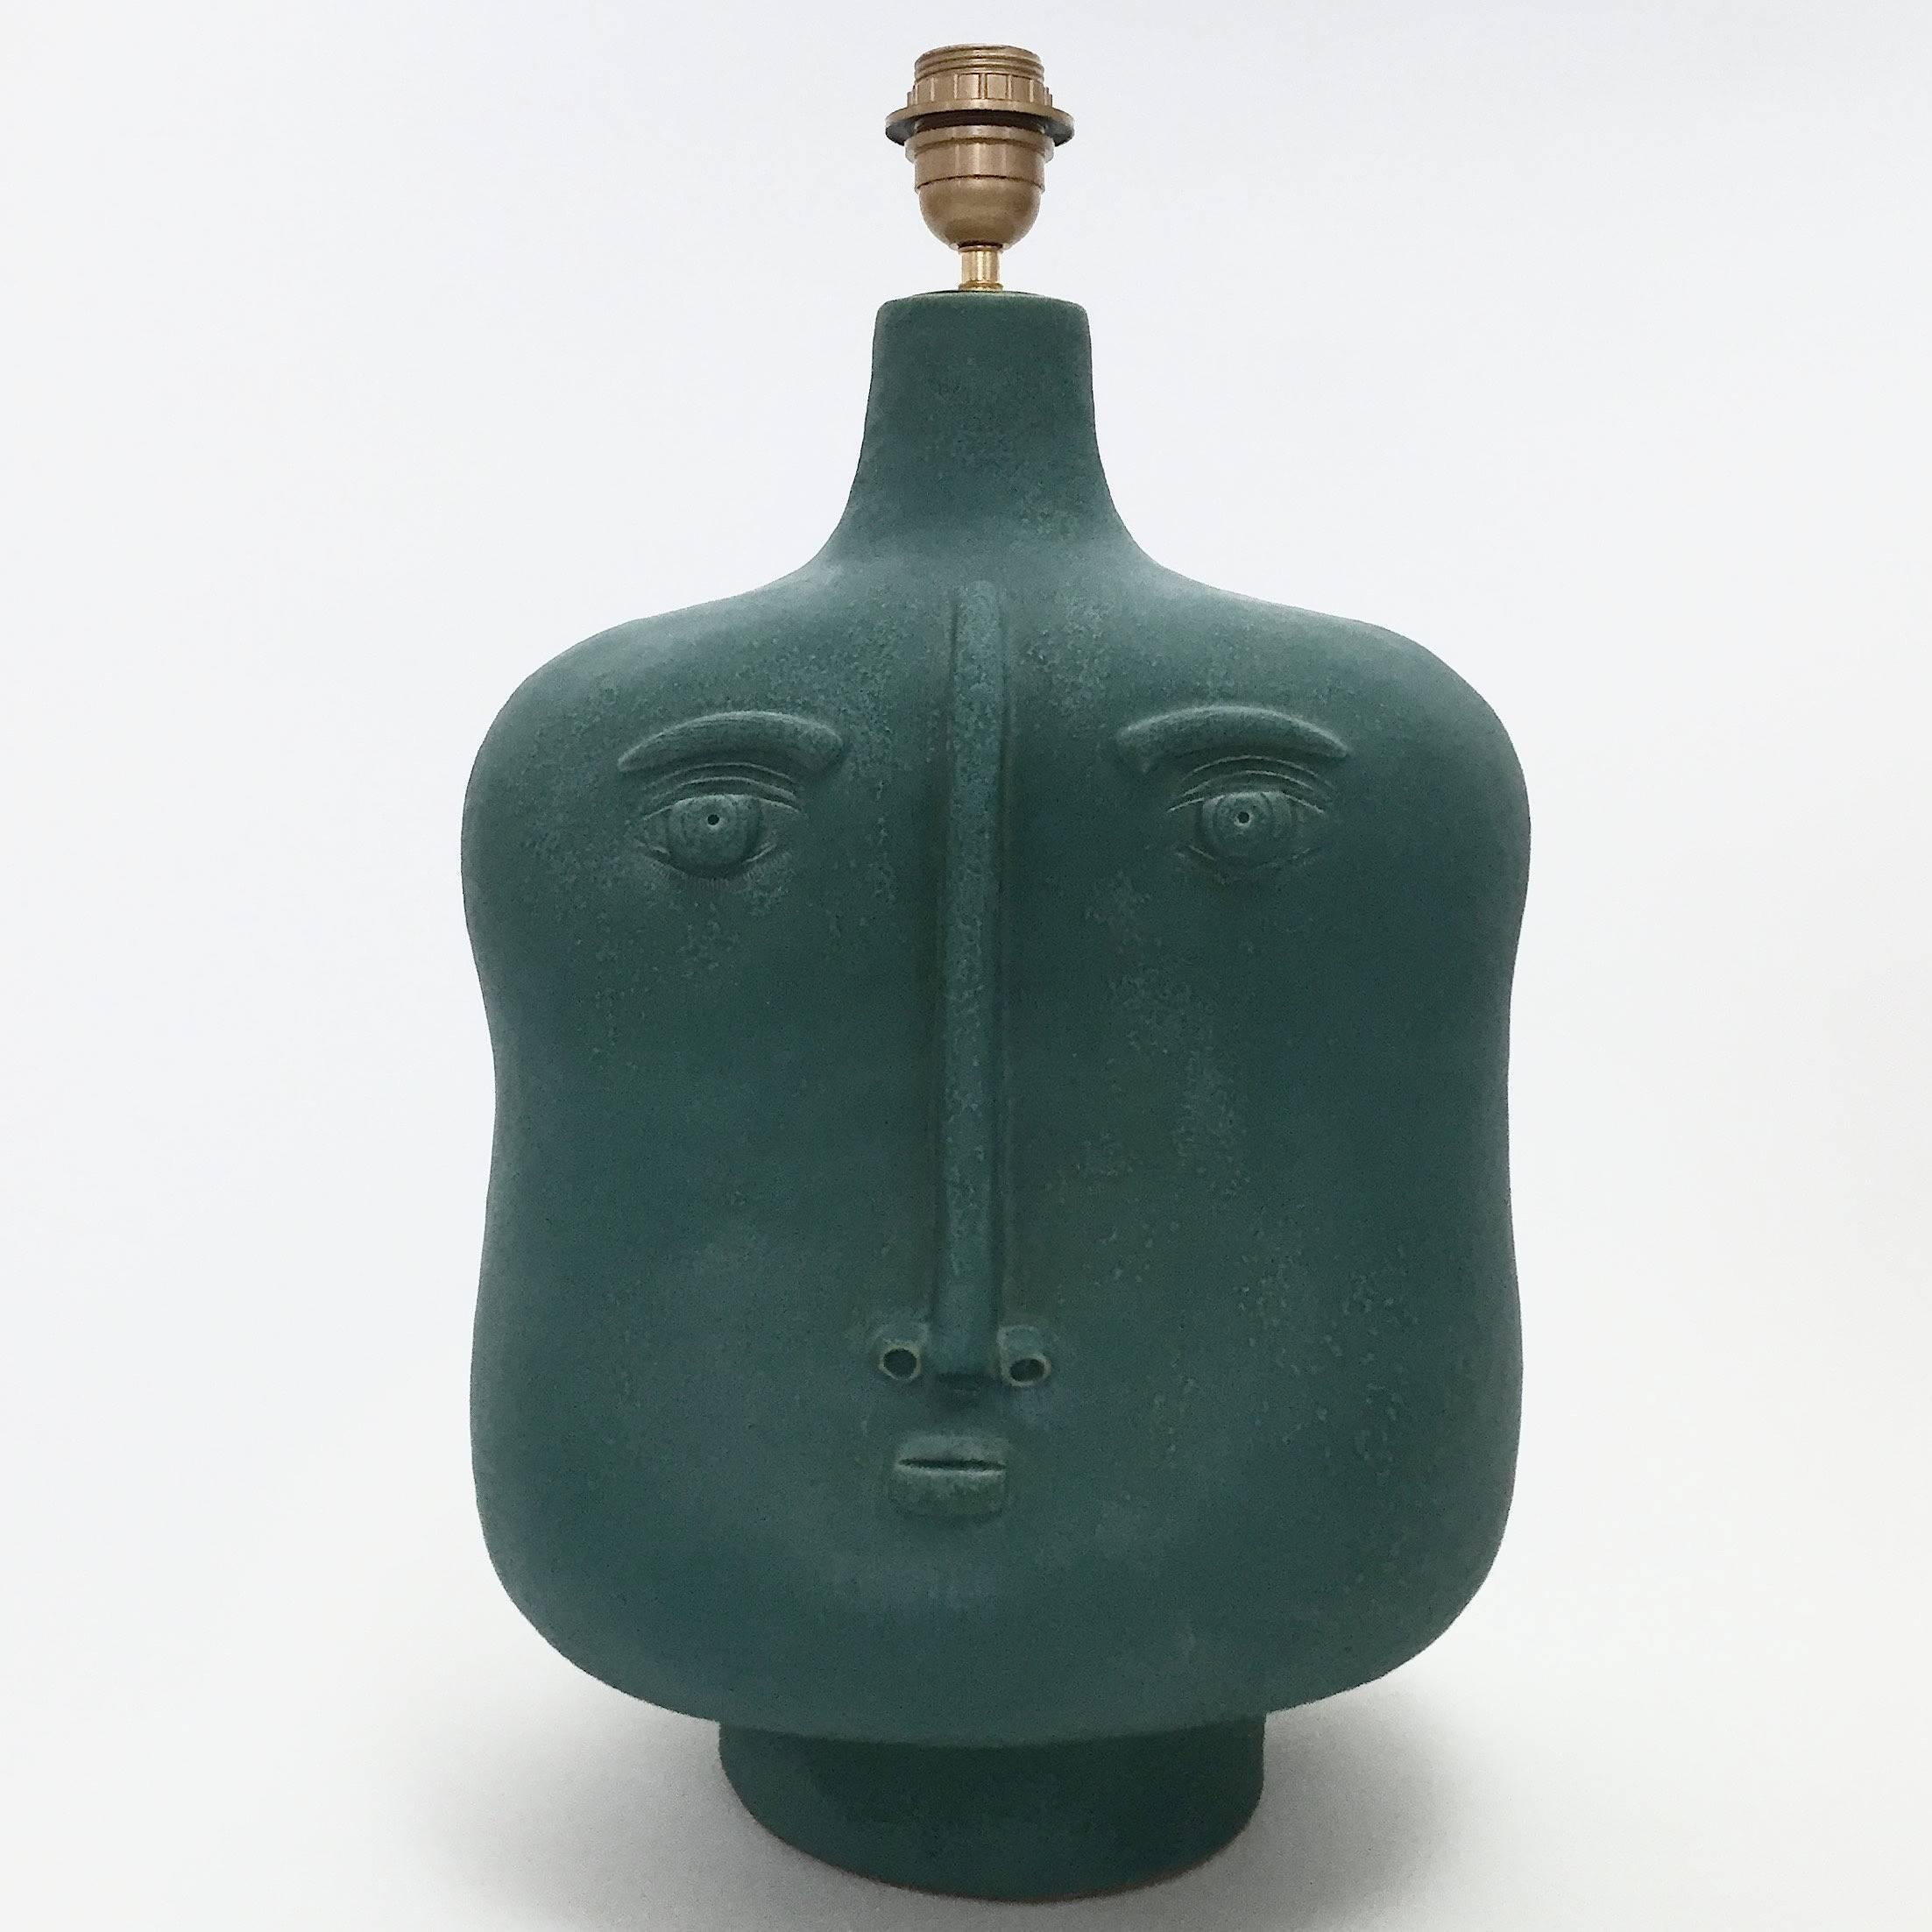 Important biomorphic shaped lamp-base, stoneware glazed in tons of cloudy teal blue/green and decorated with stylized double faces front and back.

One of a kind hand-sculpted piece, signed by the French ceramicists: Daniel Derock and Loïc de